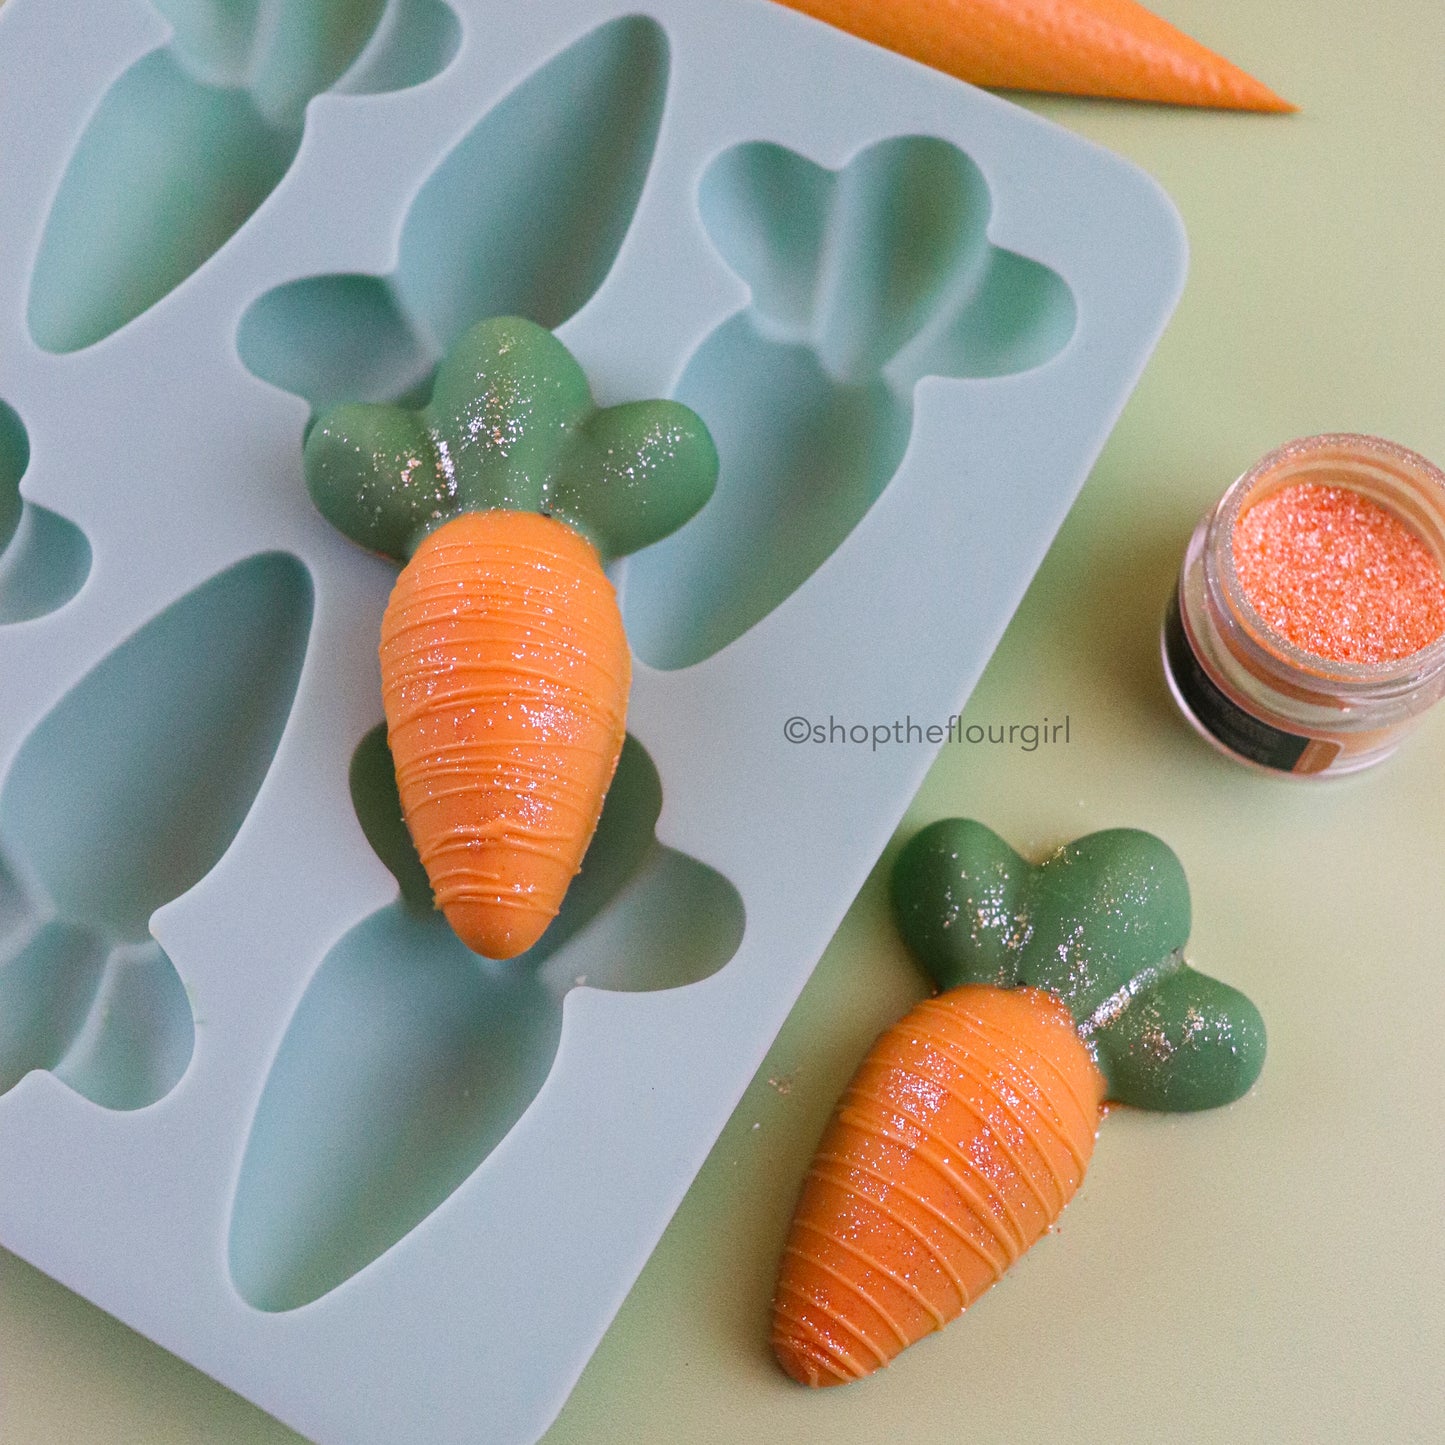 6-Cavity Silicone Carrot Mold